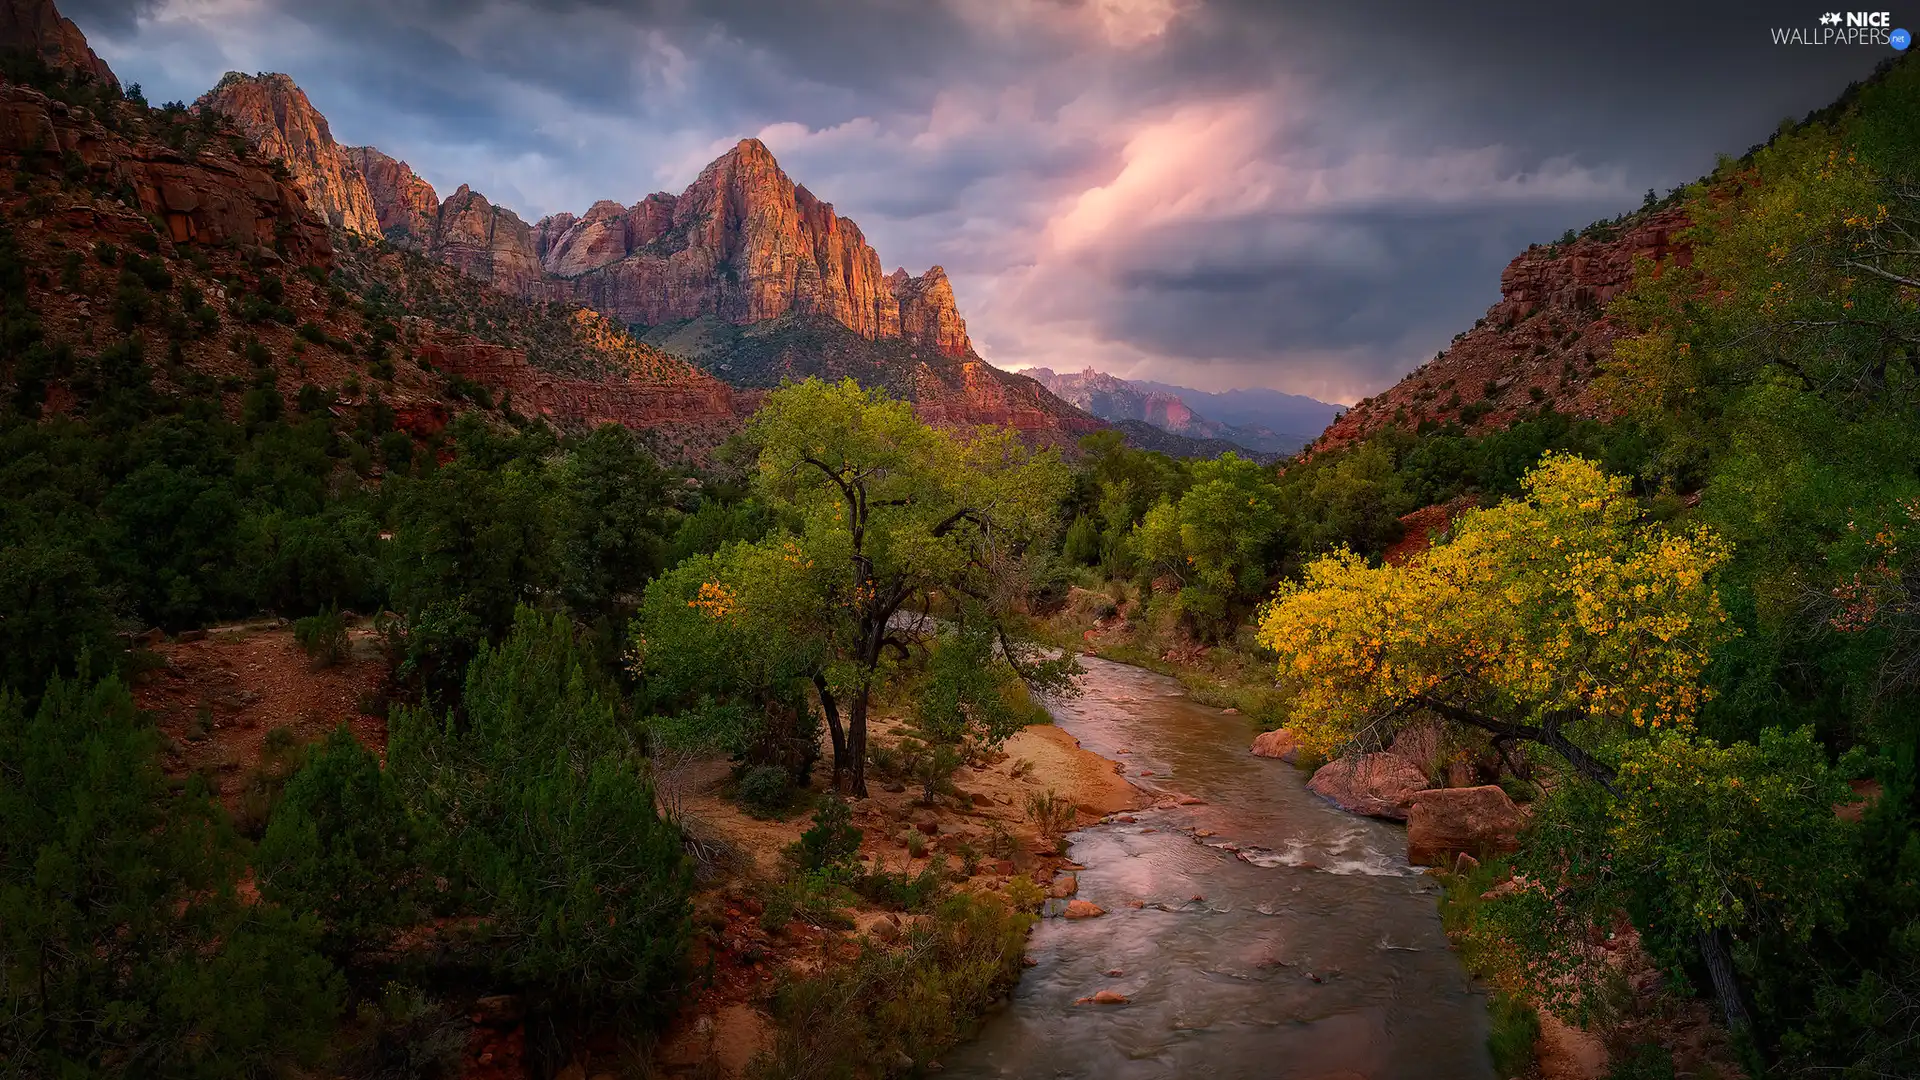 Mountain Watchman, Mountains, River, Virgin River, Utah, The United States, viewes, Zion National Park, trees